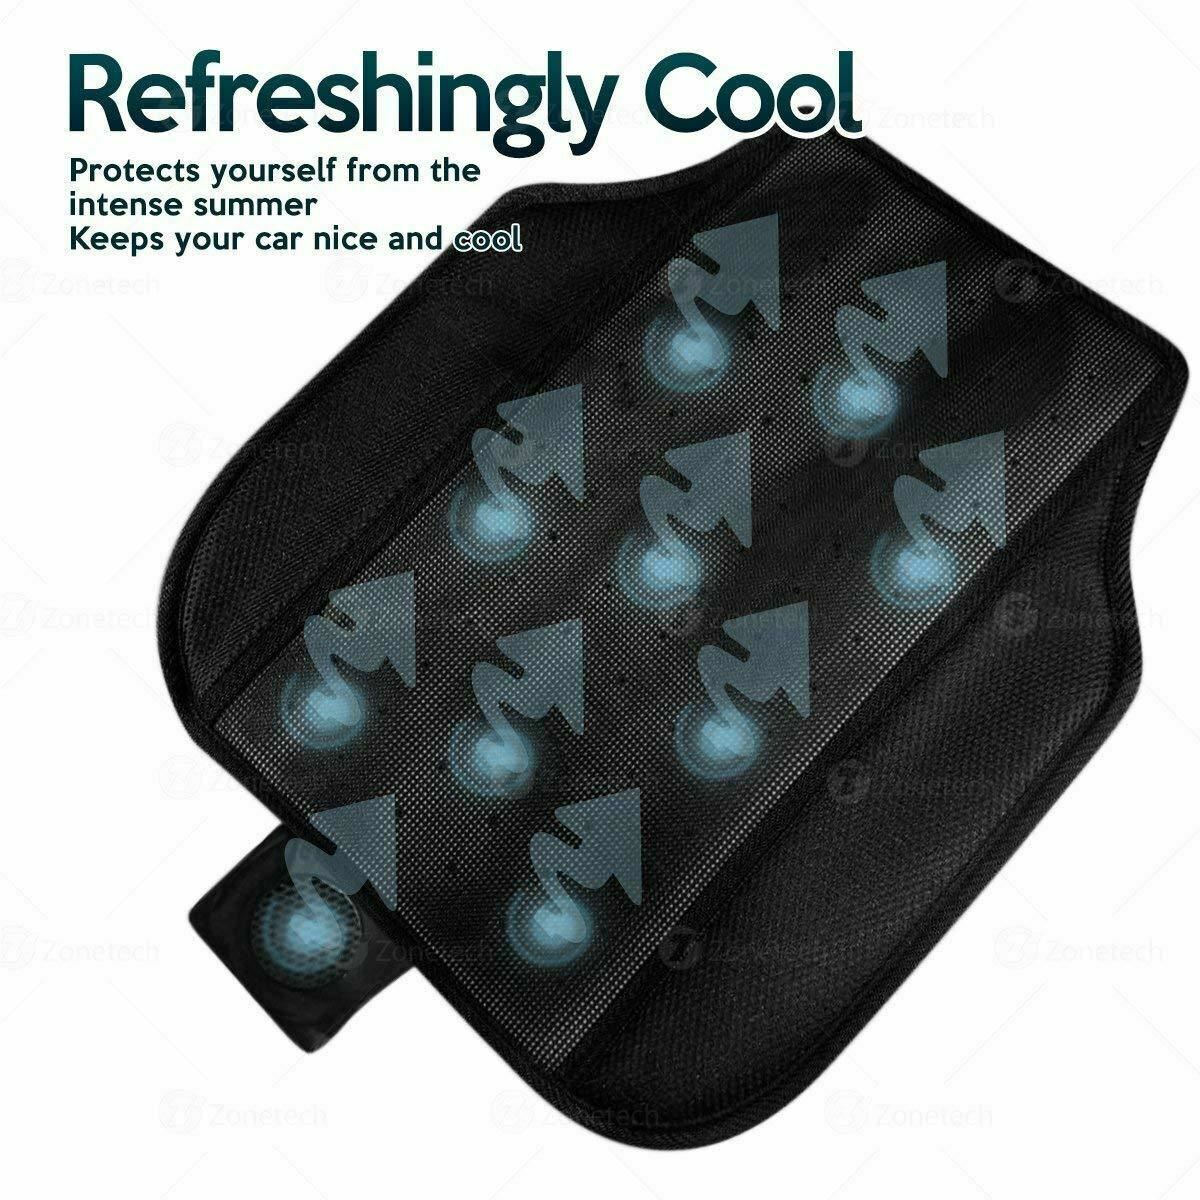 Car Vehicle Pad Cover Summer Cooling Seat Cushion